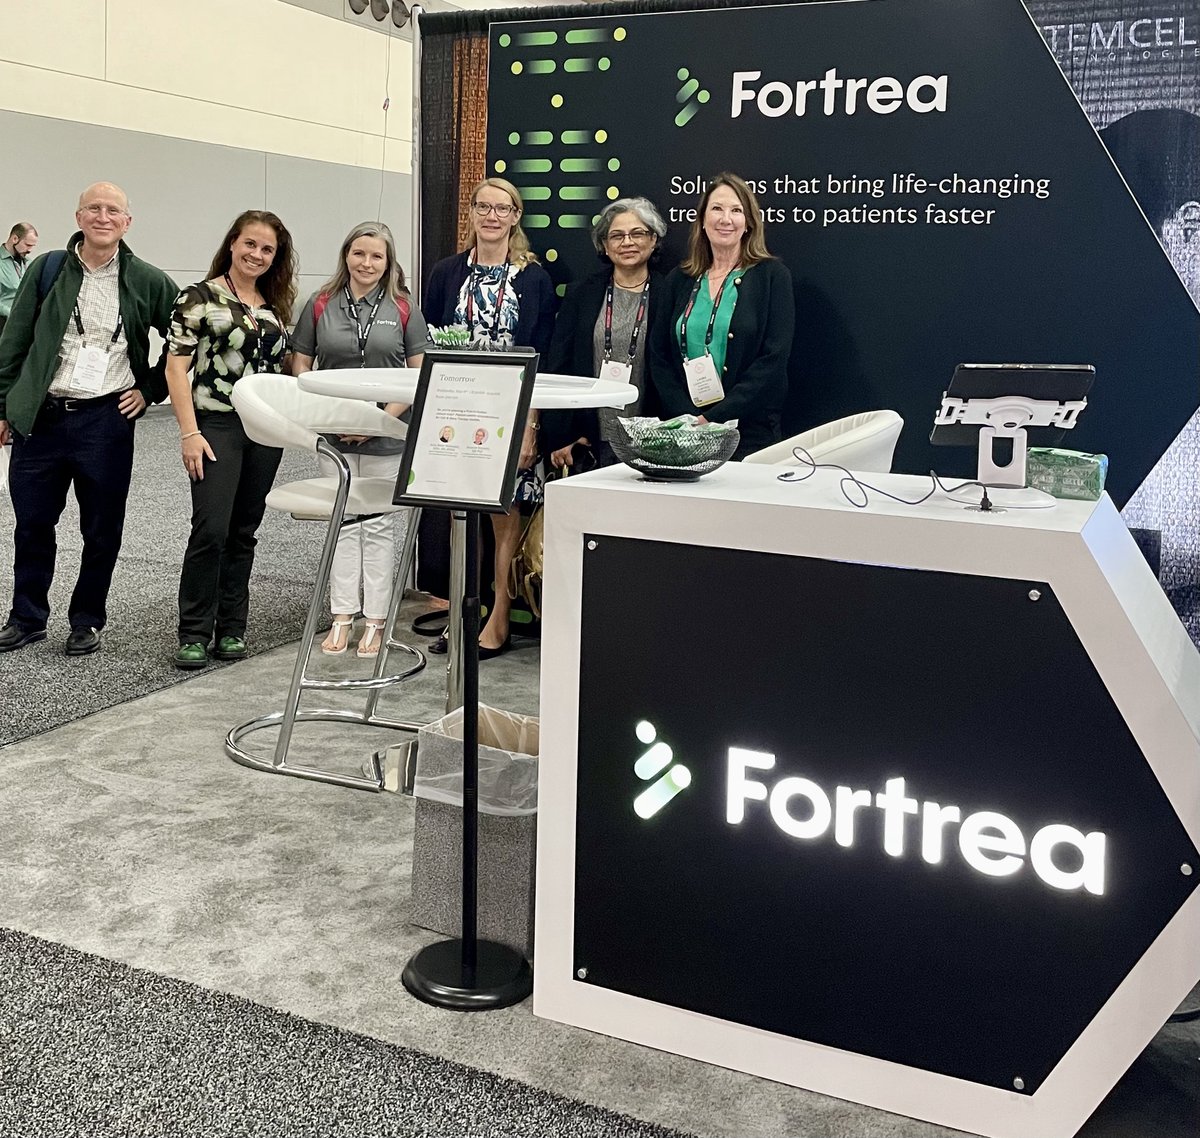 Fortrea is all set up at #ASGCT2024 and really looking forward to connecting with you! Stop by booth 1212 to connect about the future of genomic medicine. #clinicaltrials #clinicalresearch #clinicaloperations #clinicaltrialsinnovation